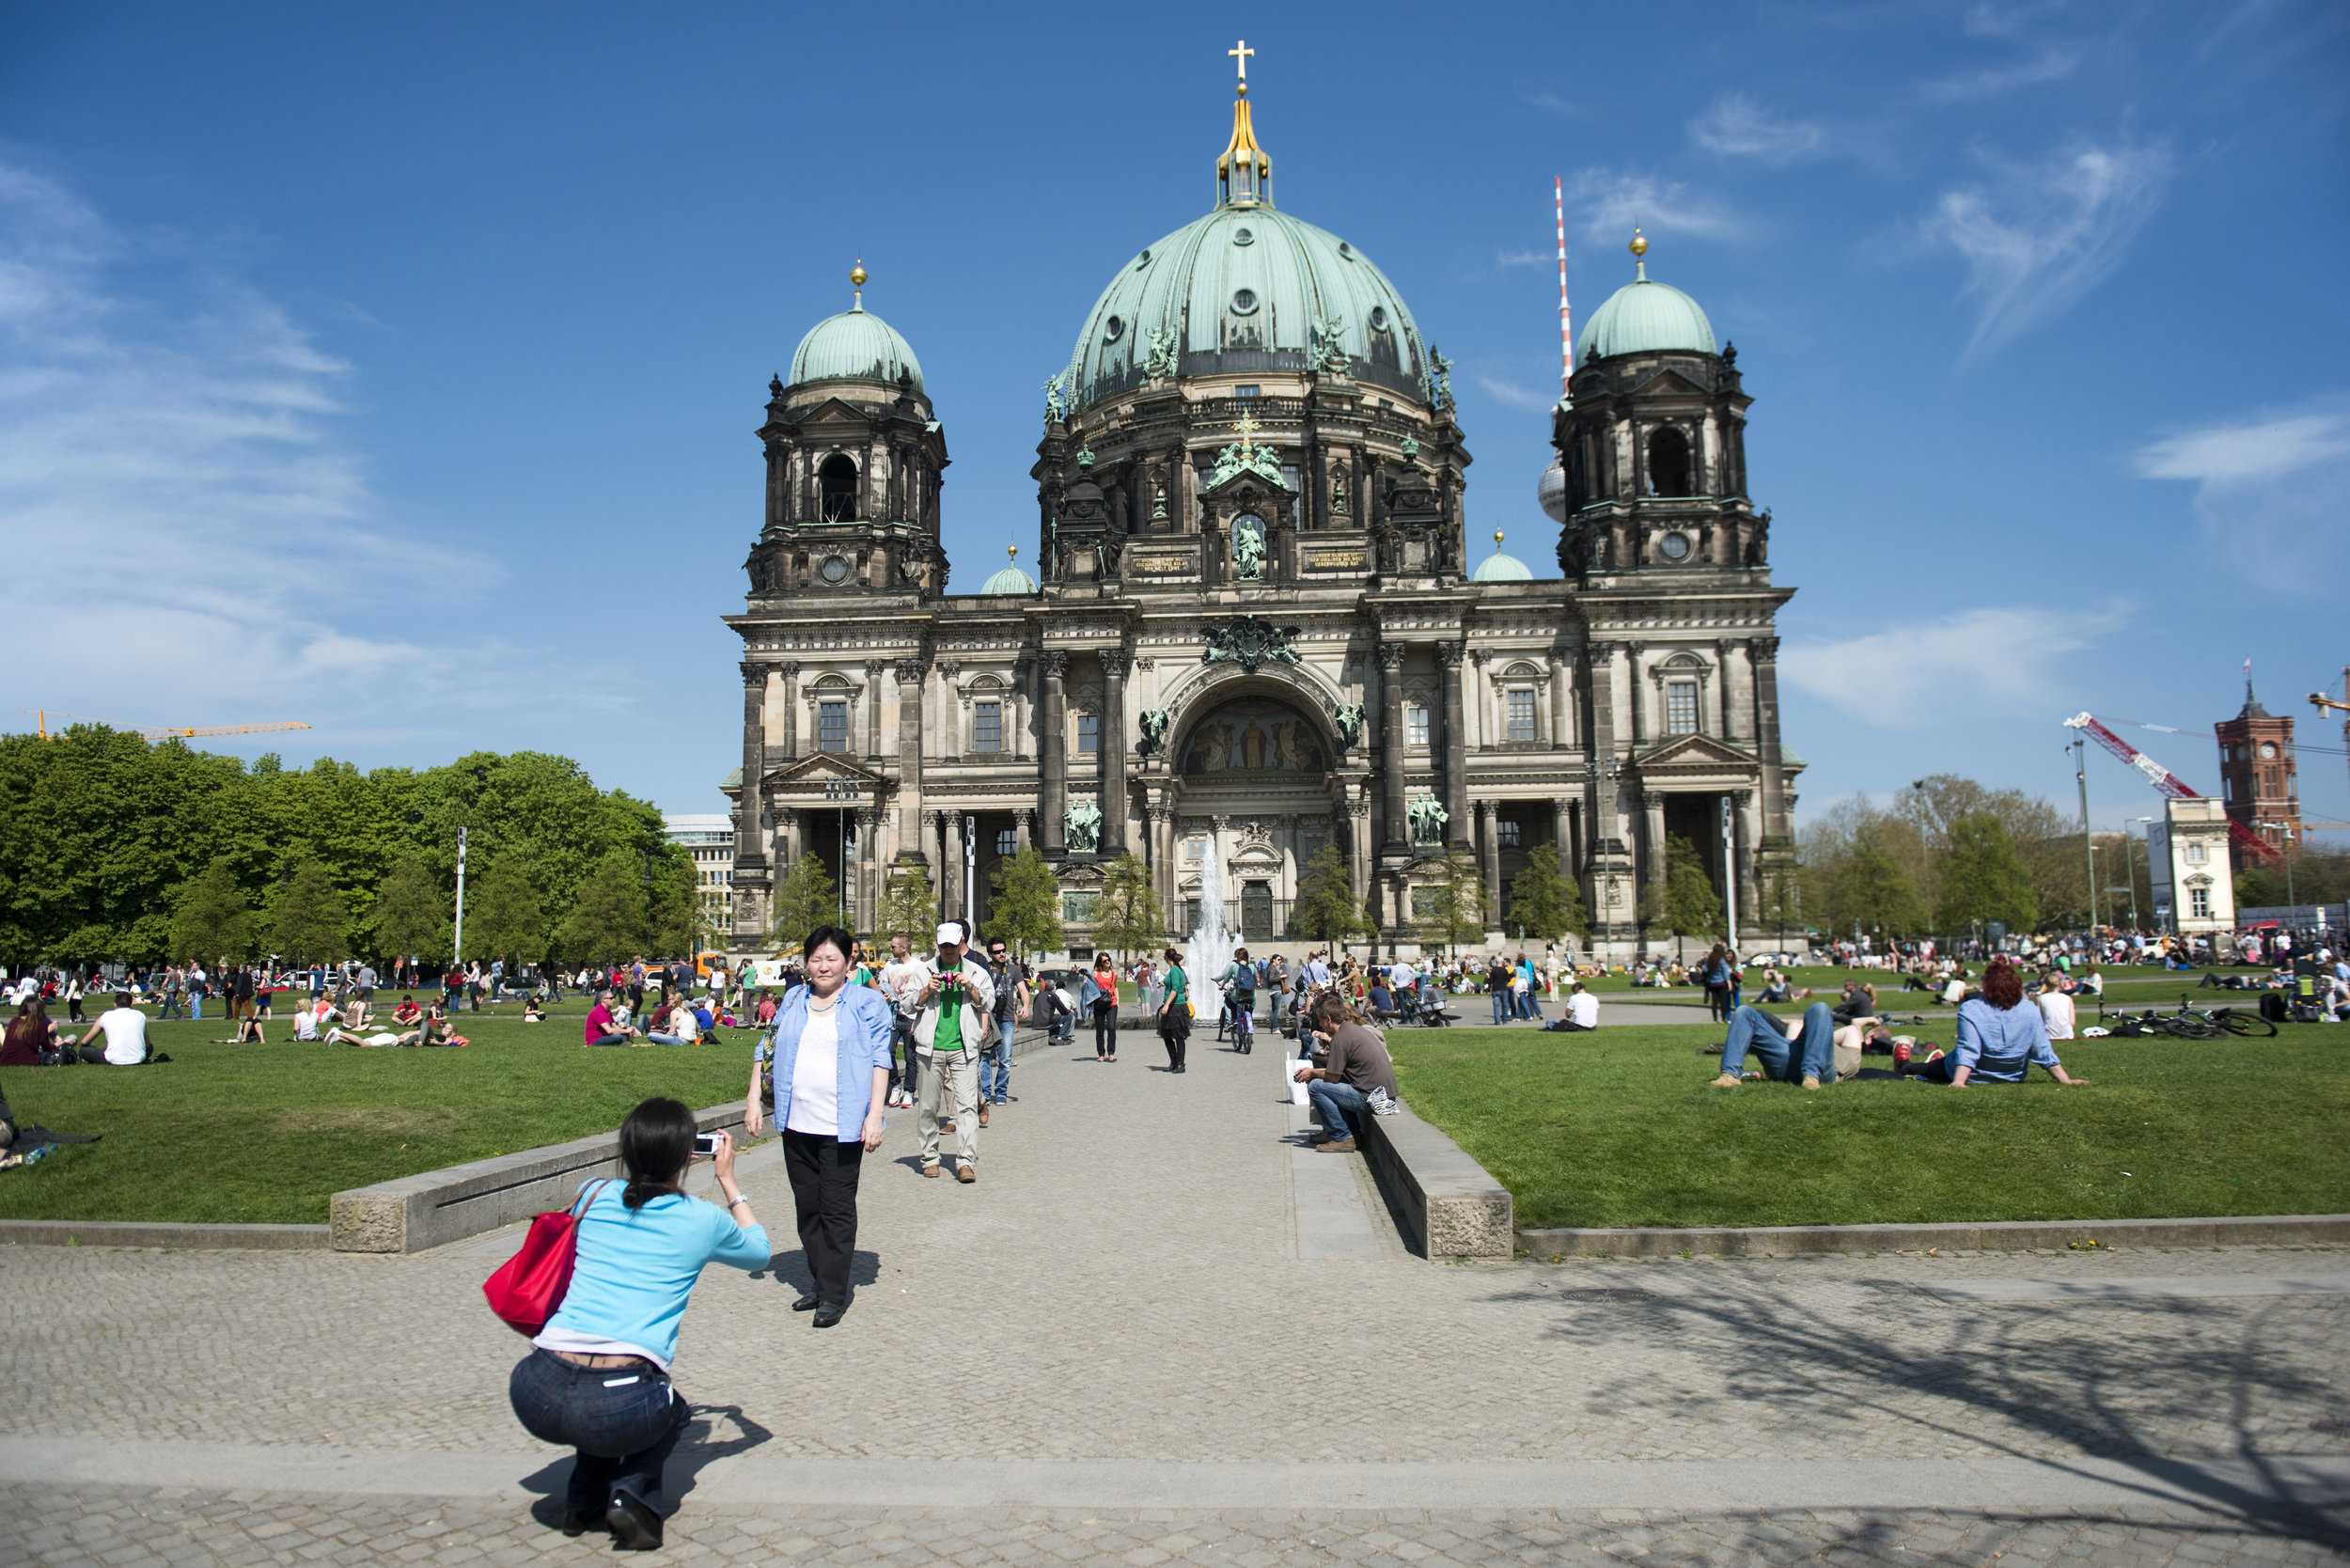   Berliner Dom,  the Berlin Cathedral. 